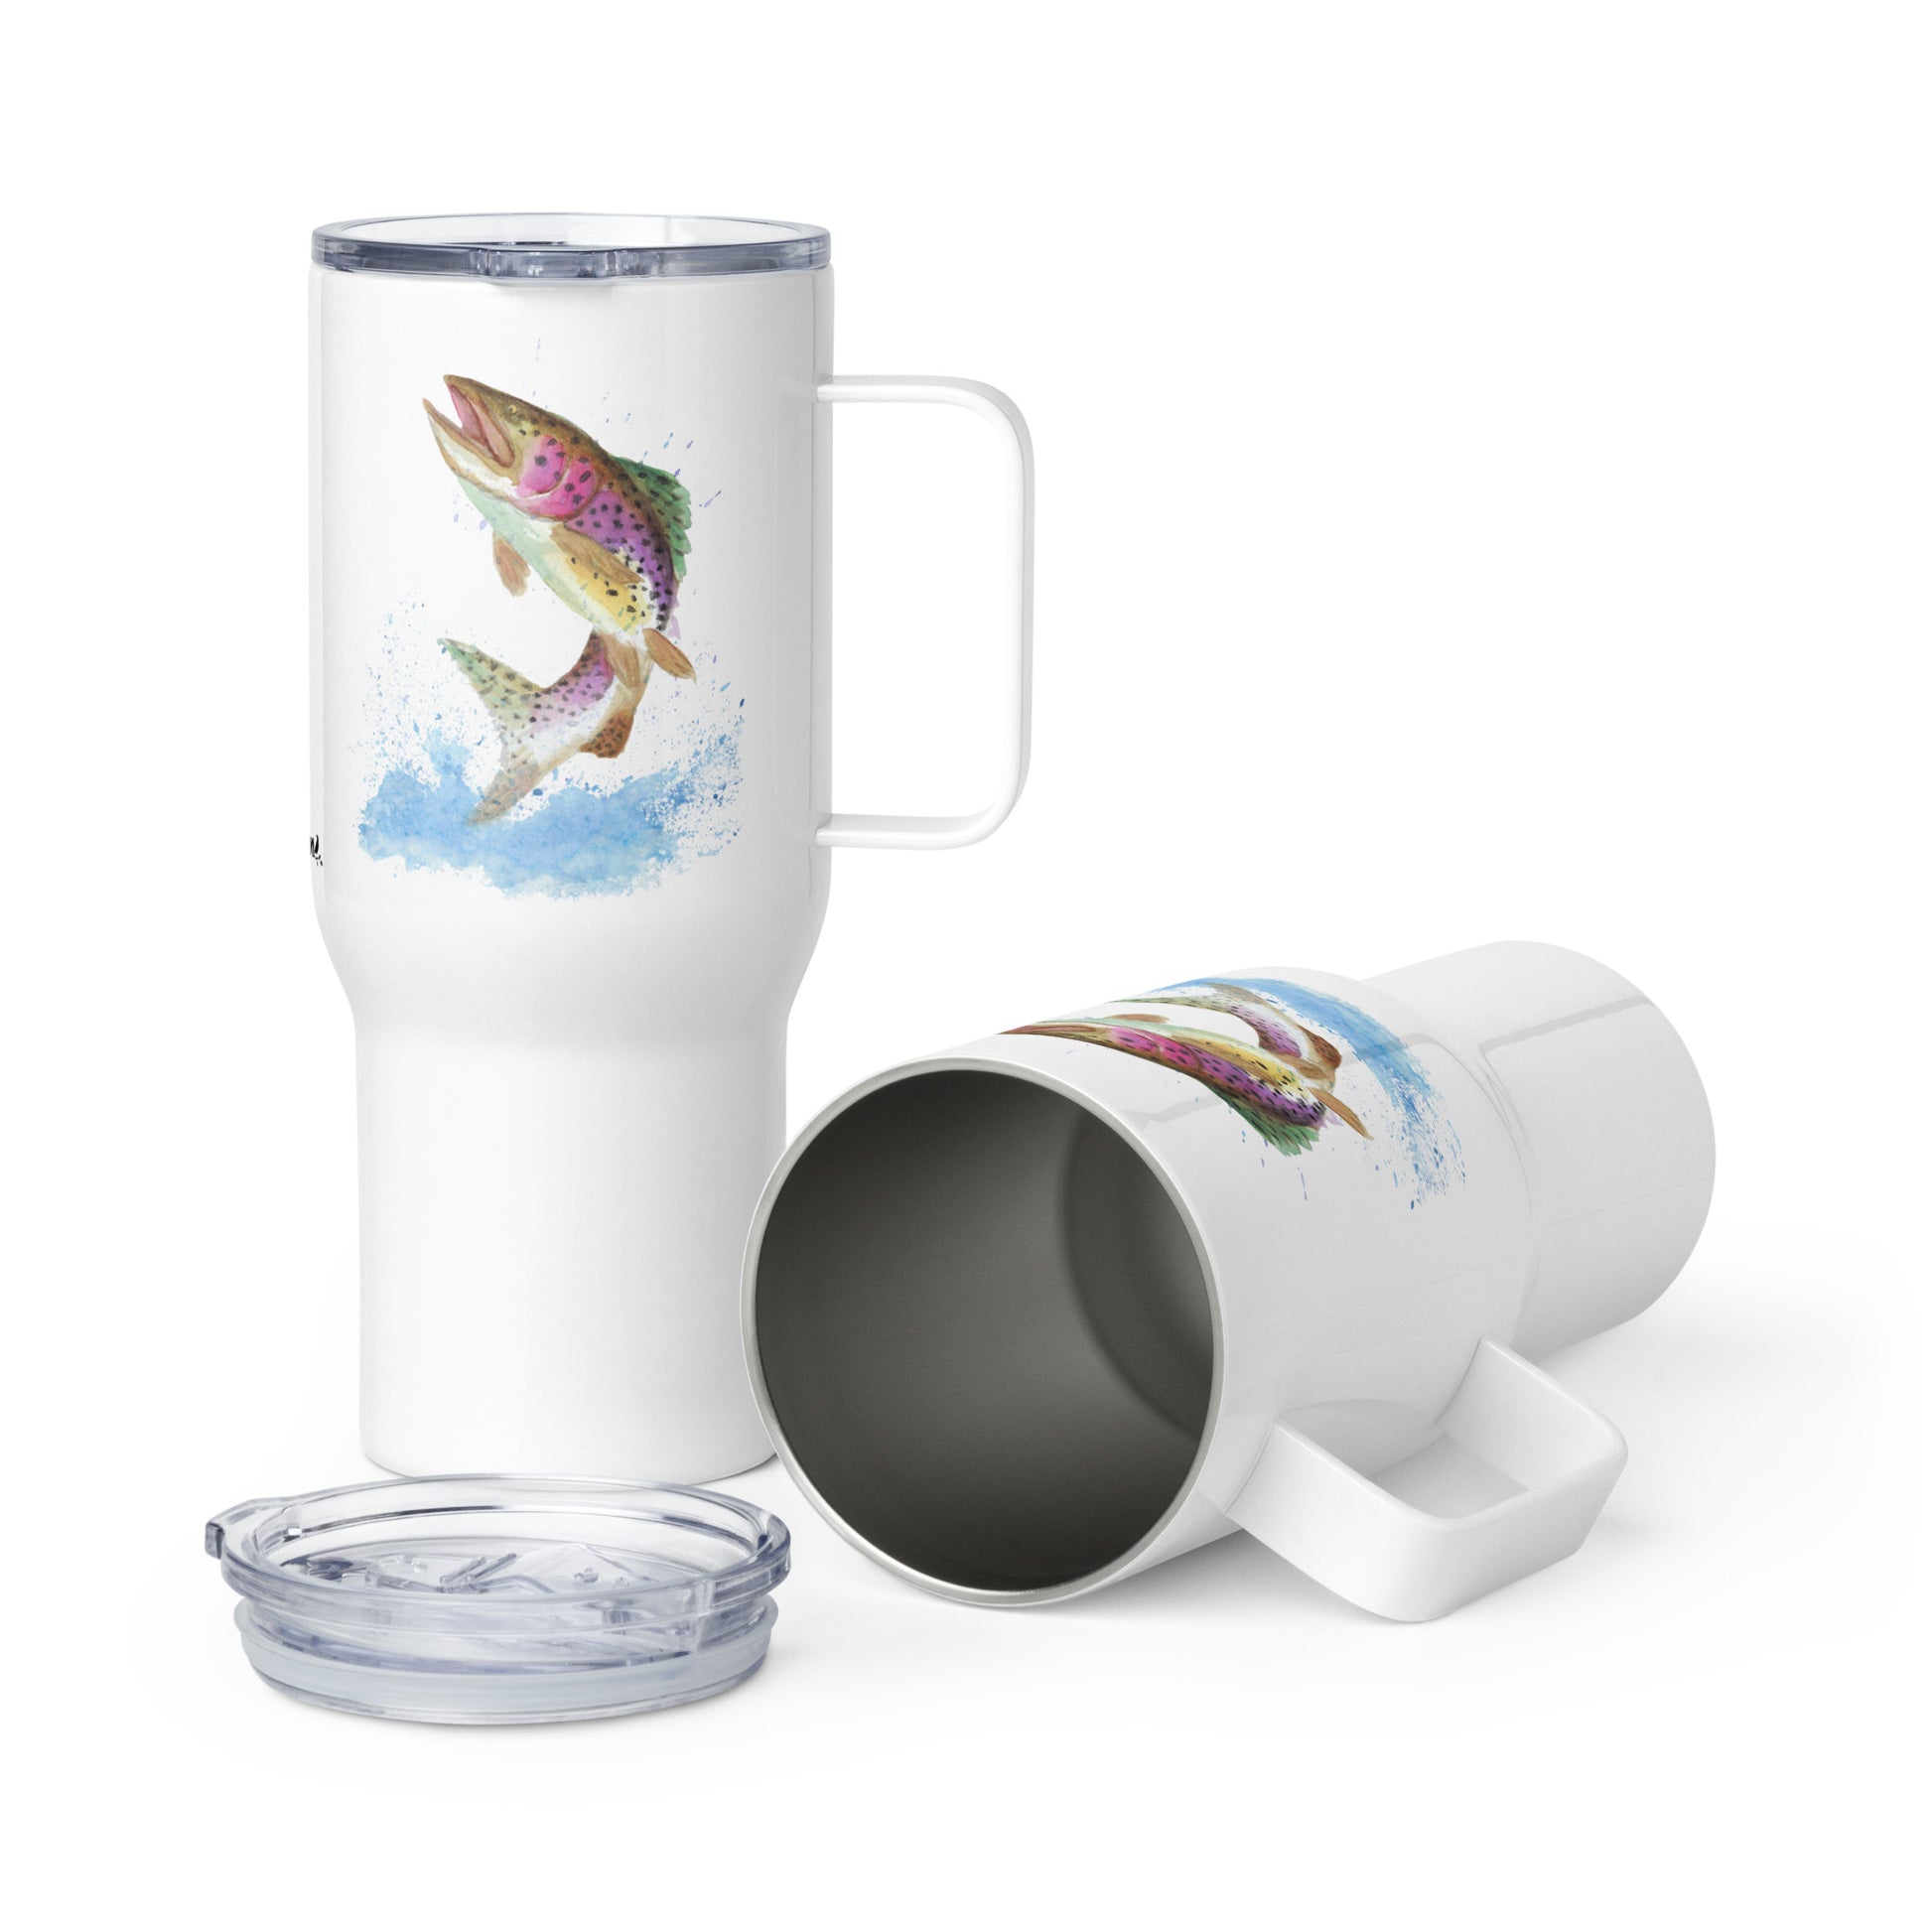 Stainless steel travel mug with handle. Holds 25 ounces of hot or cold drinks. Has print of watercolor rainbow trout fish on both sides. Fits most car cup holders. Comes with spill-proof BPA-free plastic lid.